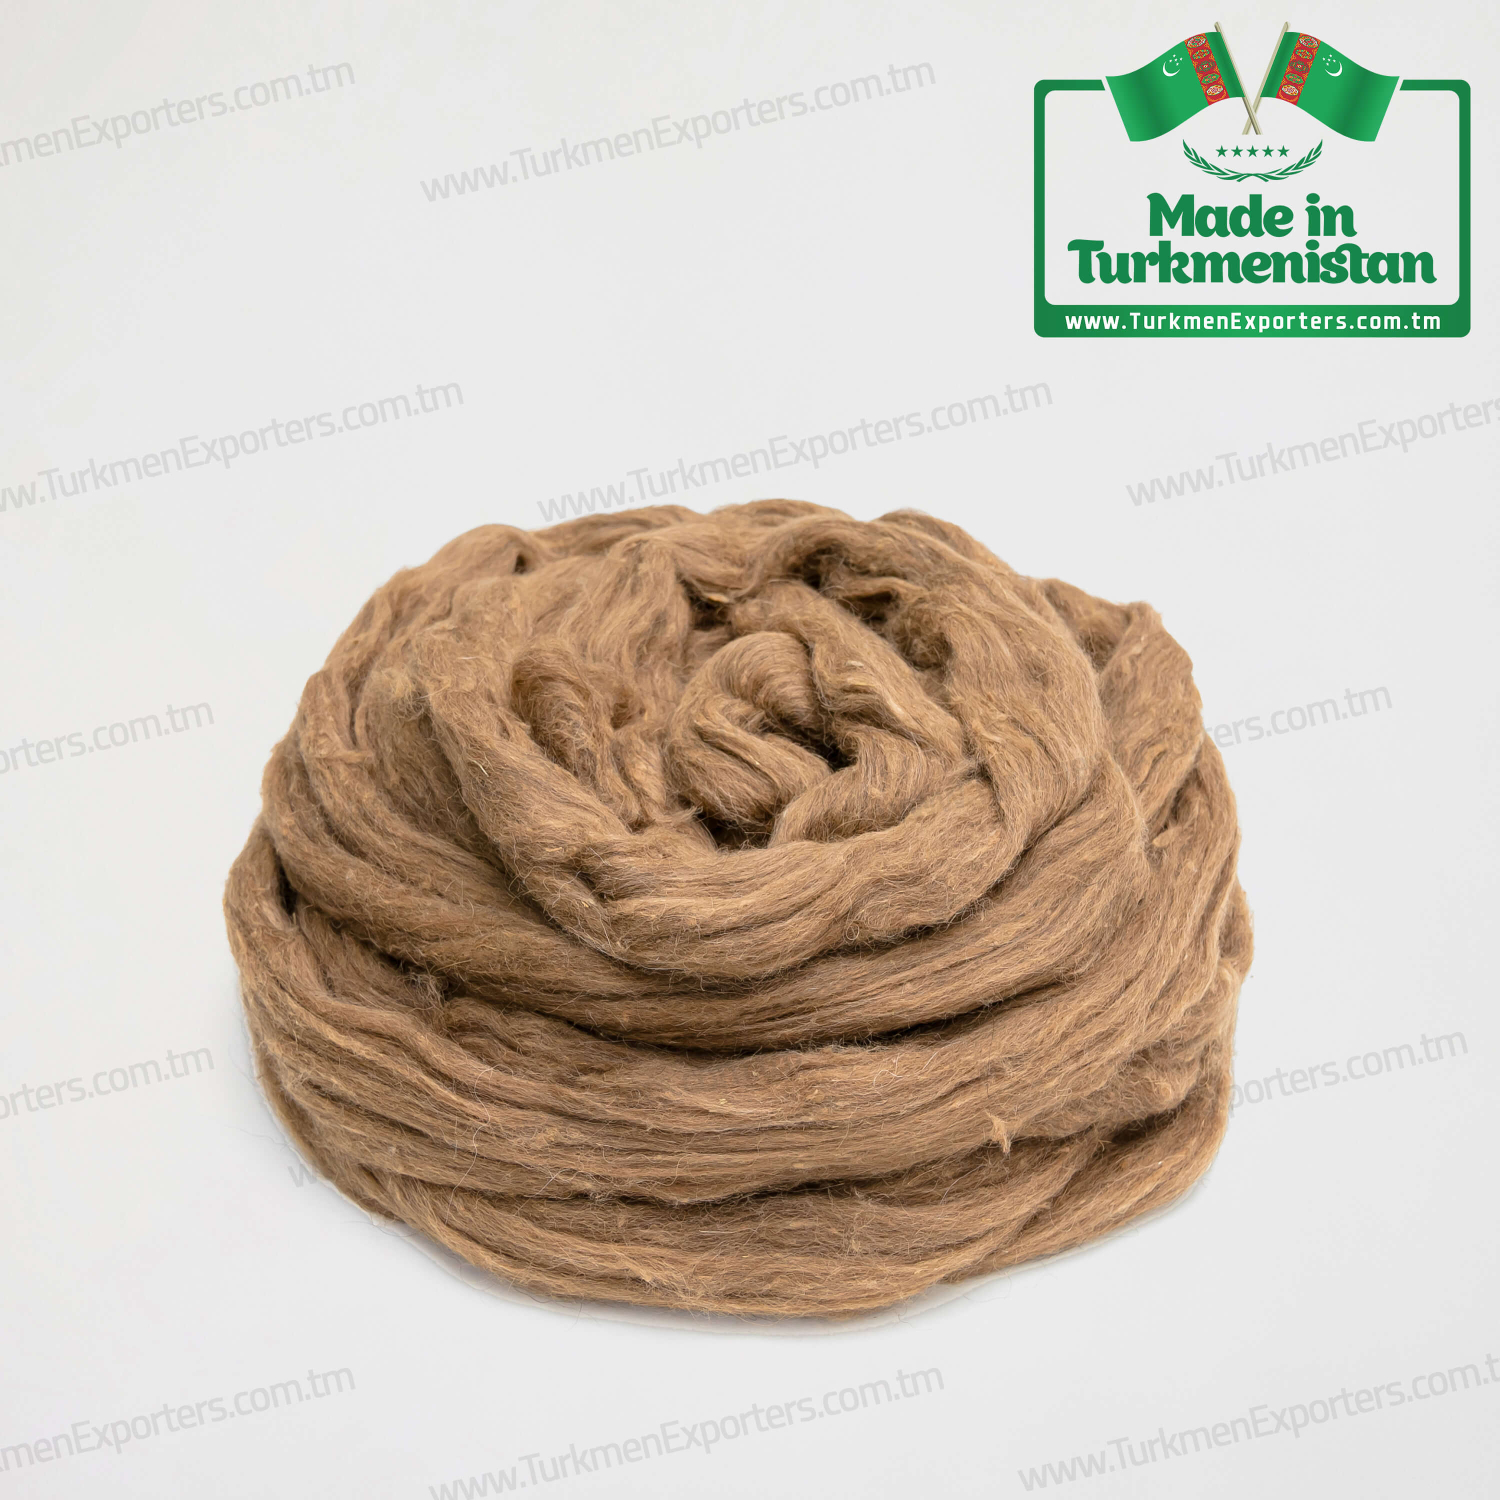 Camel wool wholesale for export from Turkmenistan | Turkmen Export, Import & Trading Services Company